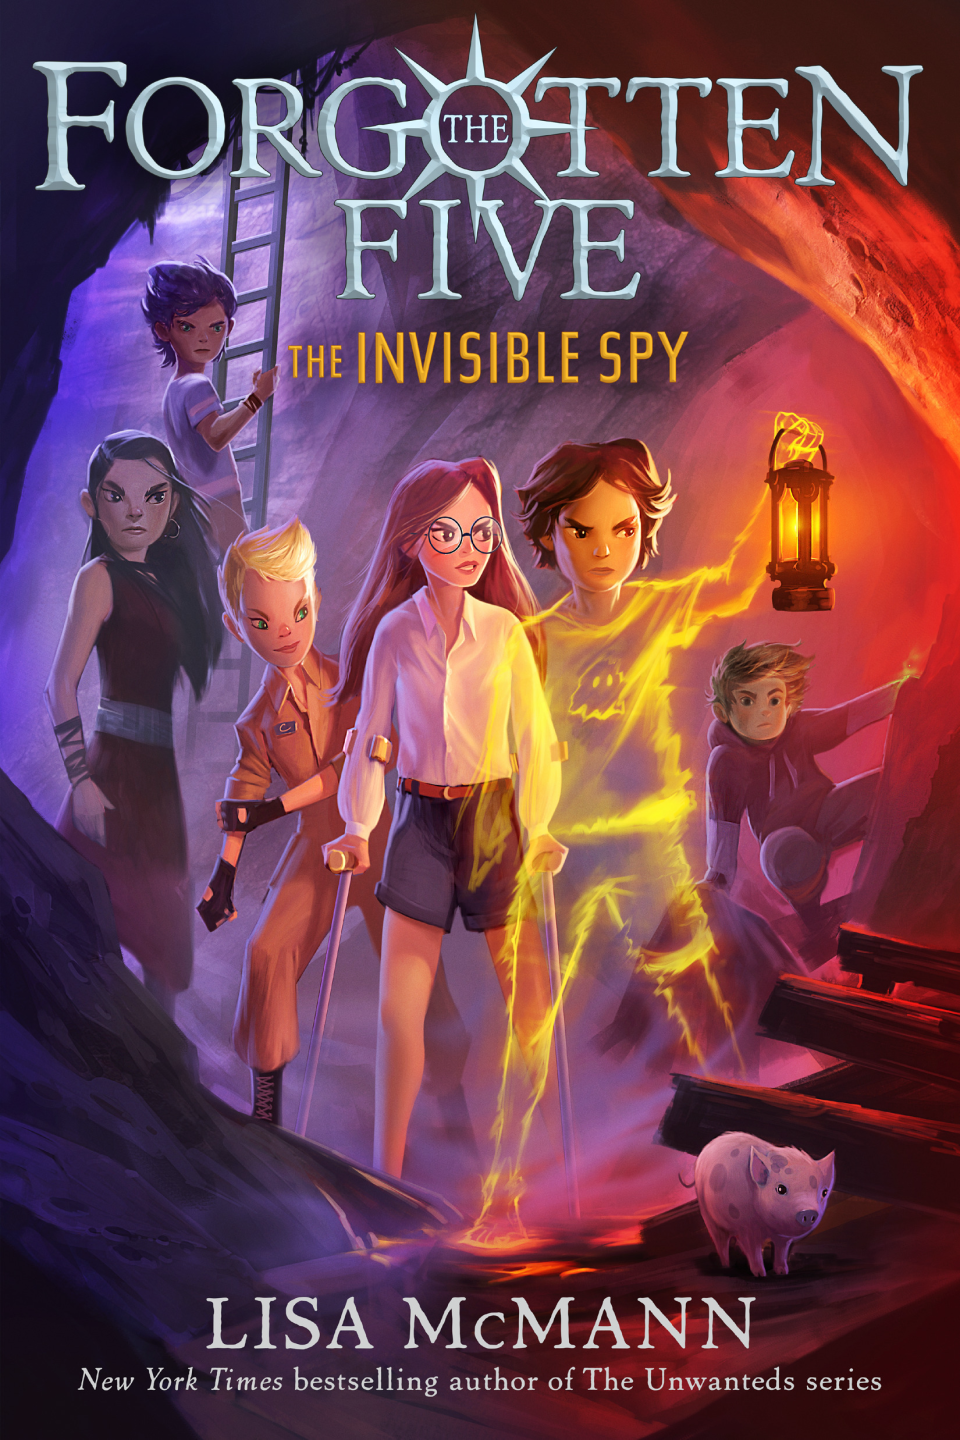 The cover of Lisa McMann's upcoming release "The Invisible Spy," the second book in "The Forgotten Five" series.